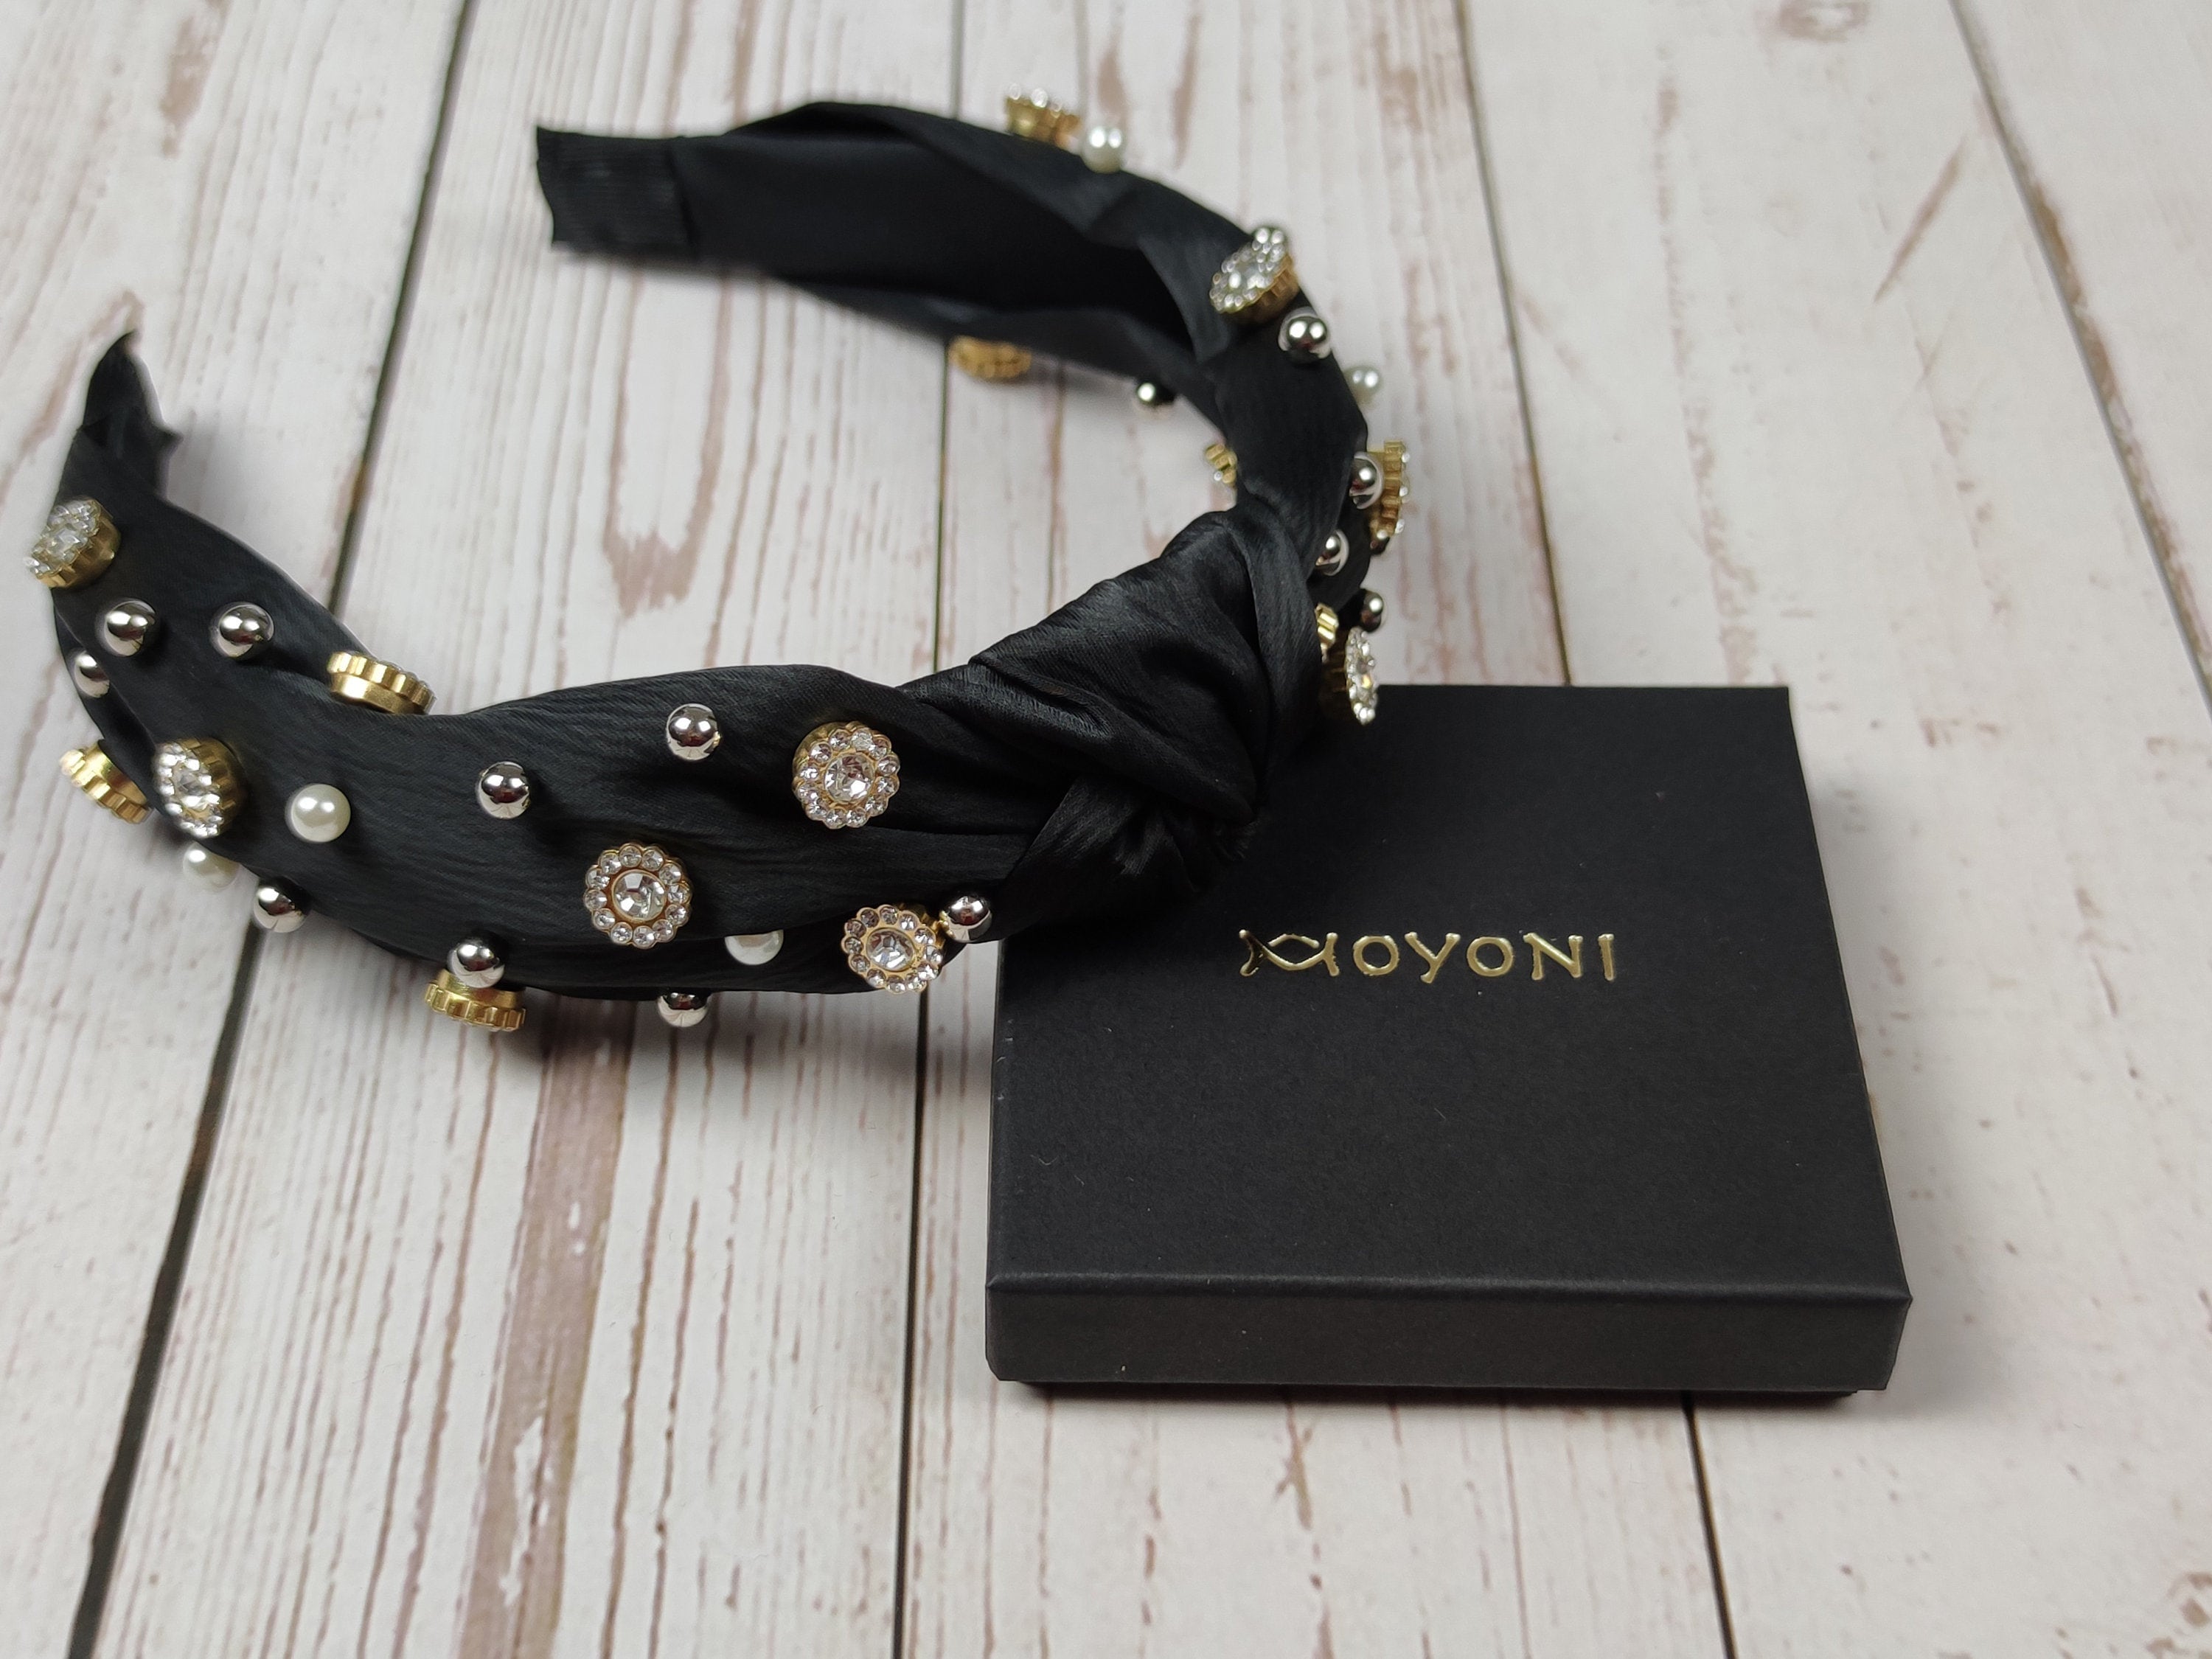 Stay on-trend with this must-have black satin knotted headband, designed with a boho chic touch.